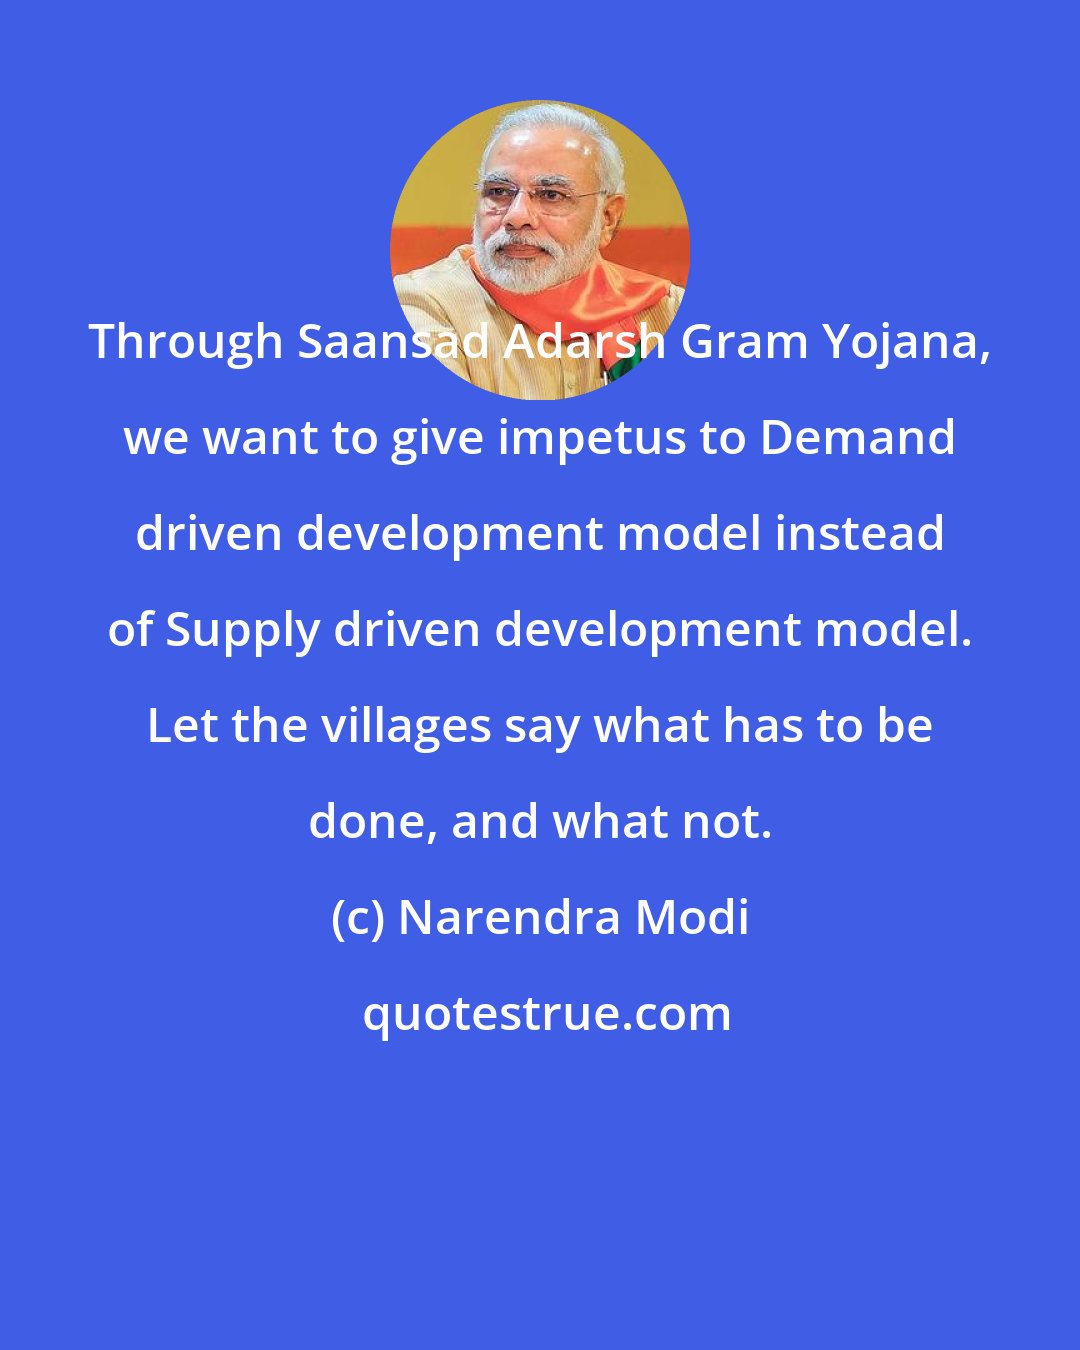 Narendra Modi: Through Saansad Adarsh Gram Yojana, we want to give impetus to Demand driven development model instead of Supply driven development model. Let the villages say what has to be done, and what not.